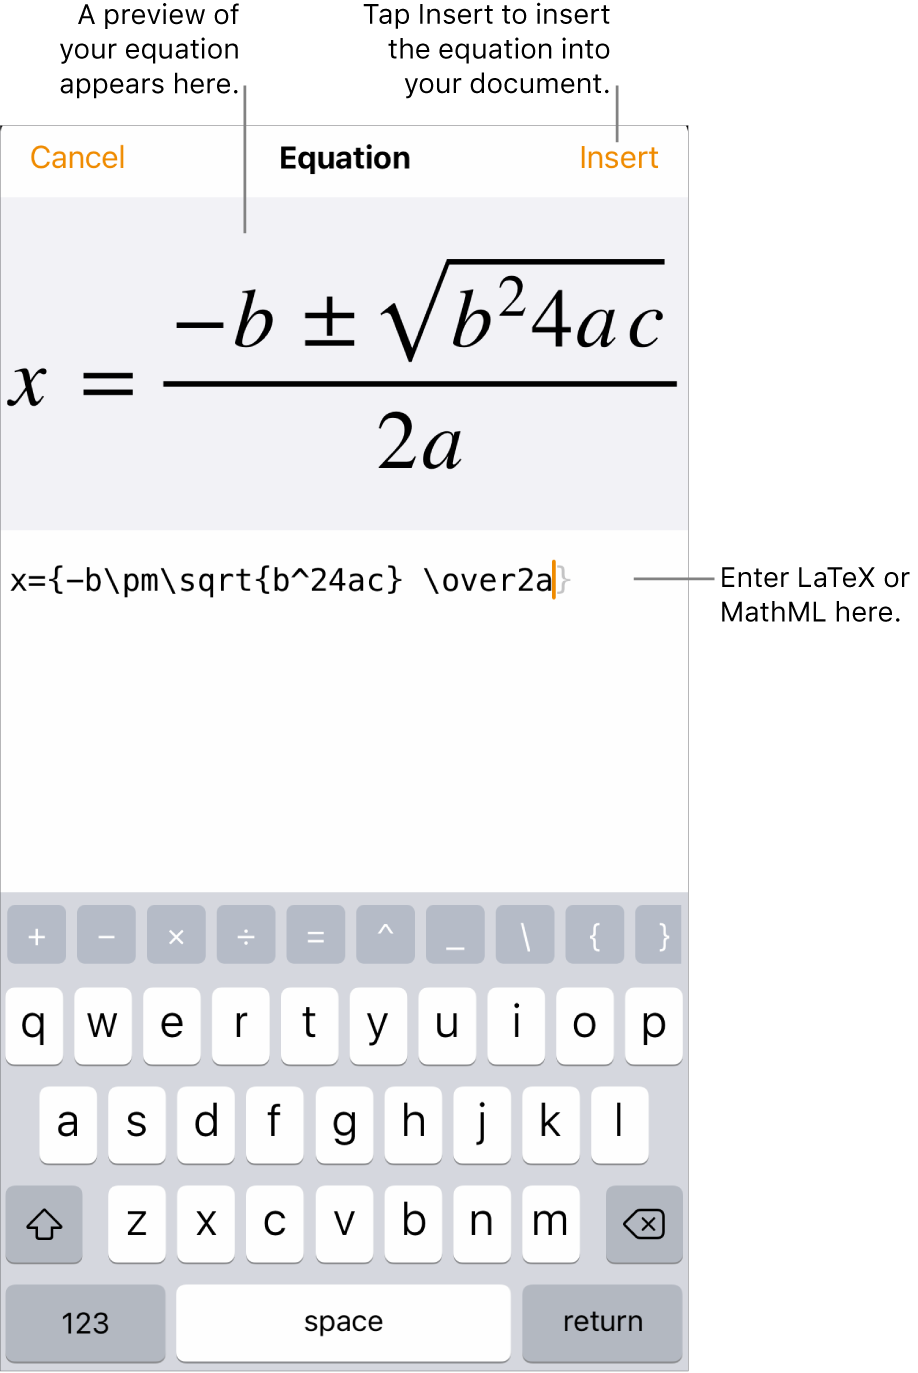 The Equation dialog, showing the quadratic formula written using LaTeX commands, and a preview of the formula above.